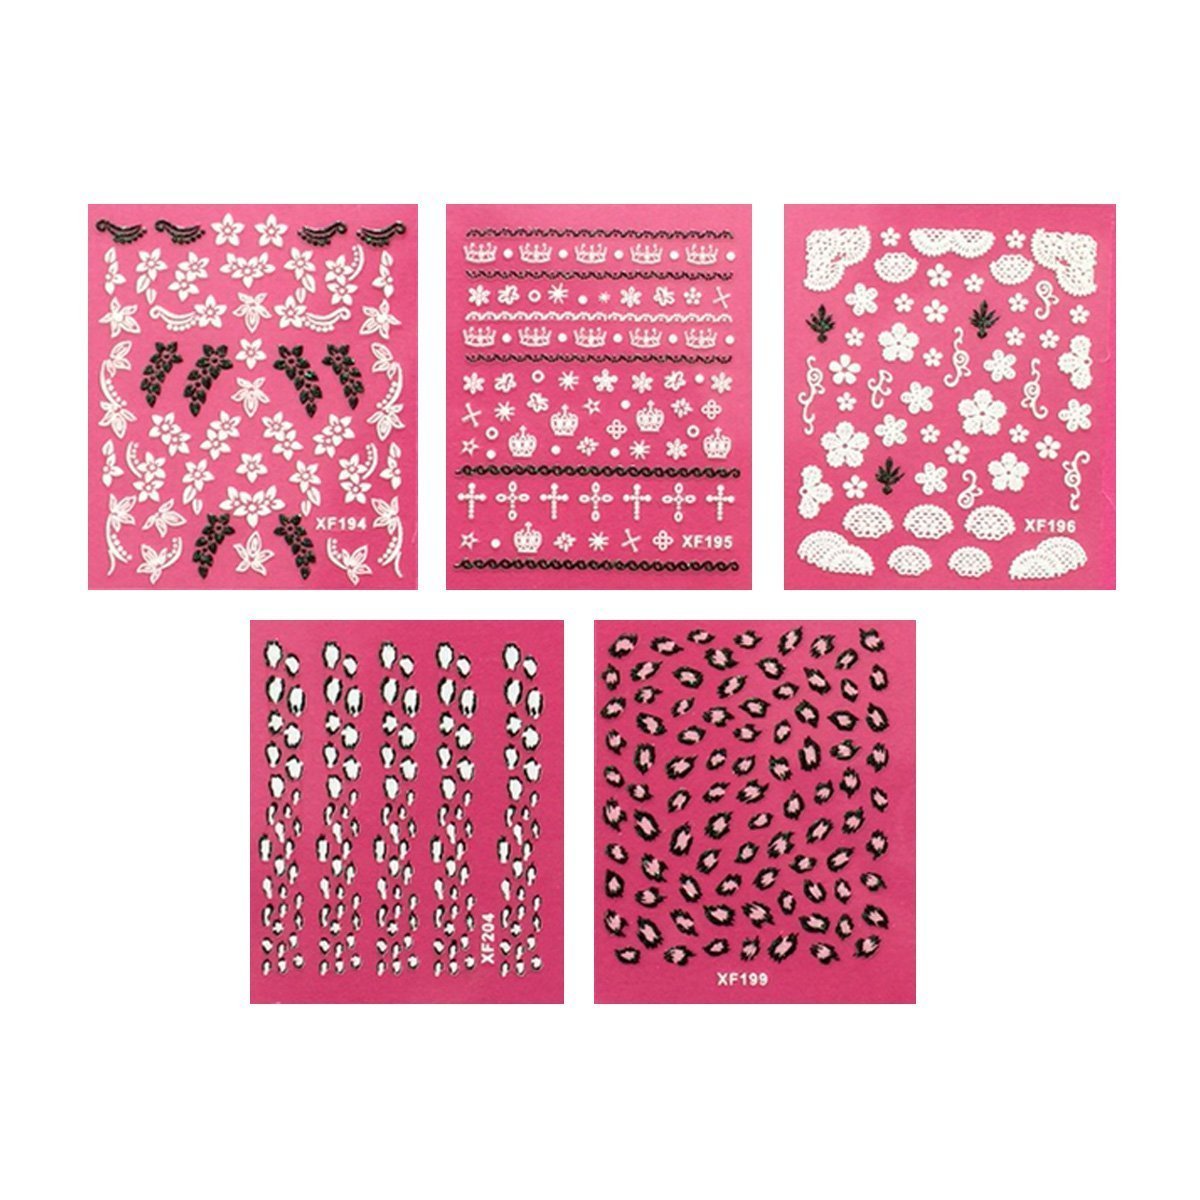 Wrapables Leopard Print, Floral, Crowns and Crosses Nail Art Self-Adhesive Stickers Nail Decals, Set of 5